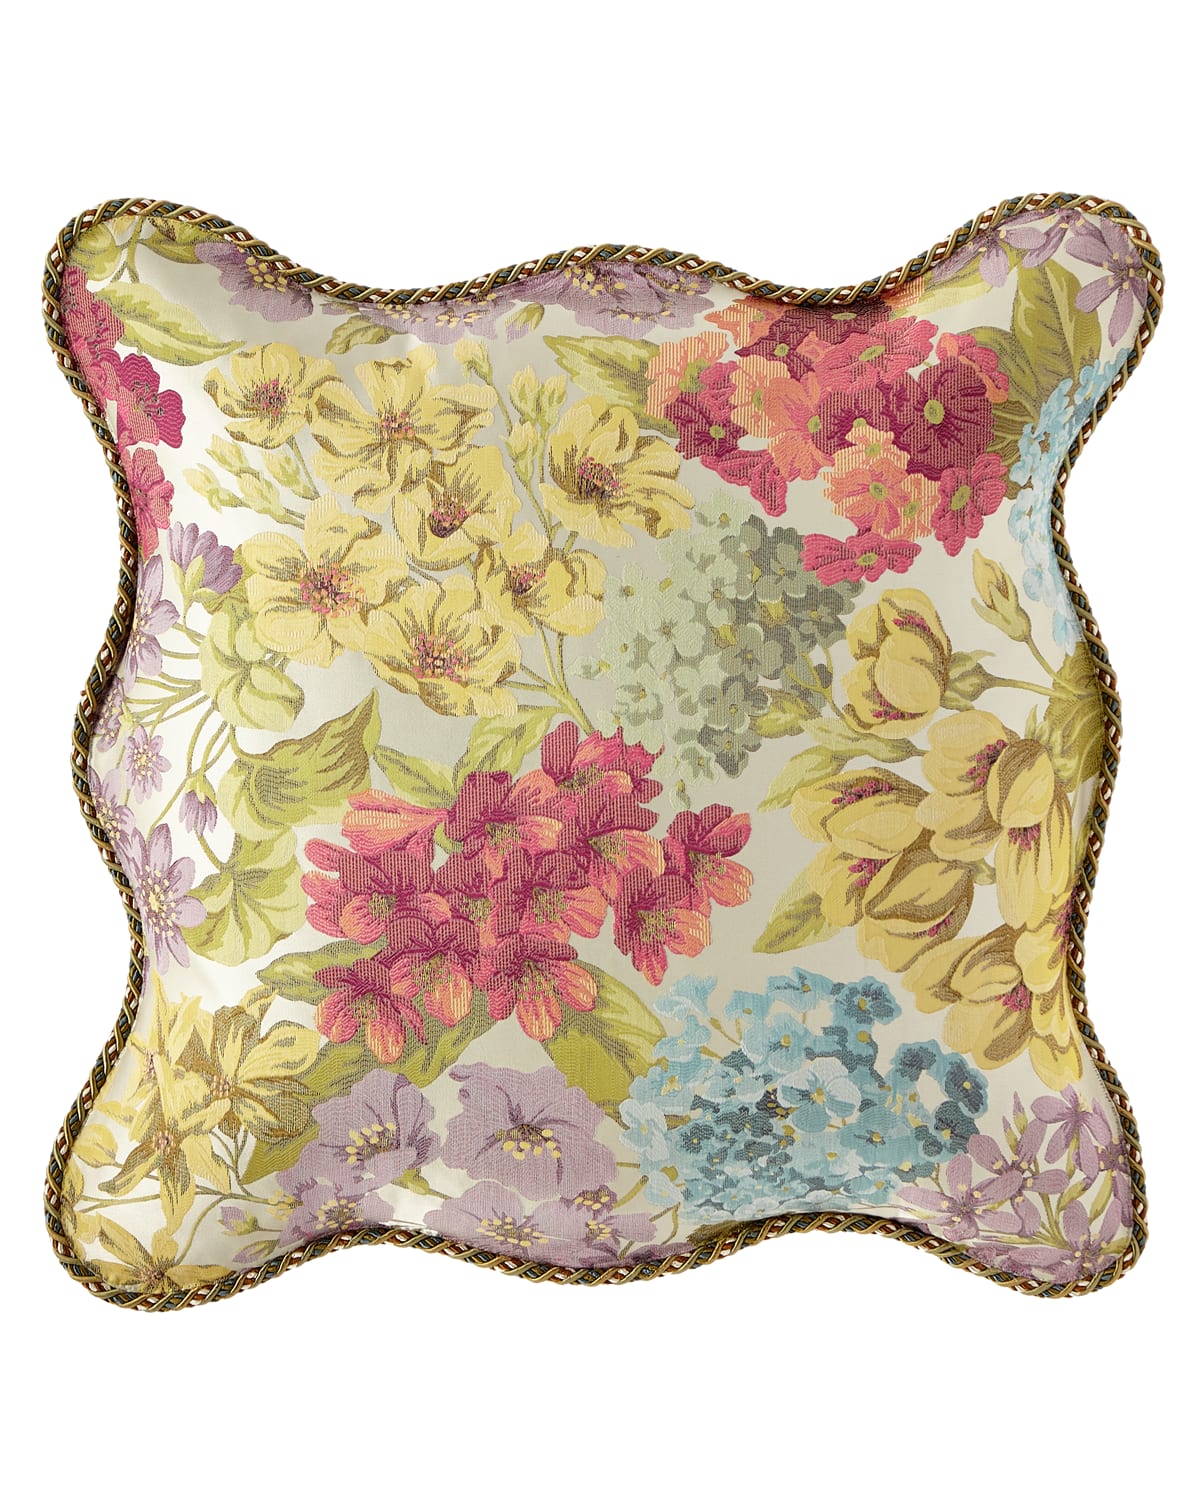 Image Sweet Dreams Giverny Floral Scalloped European Sham